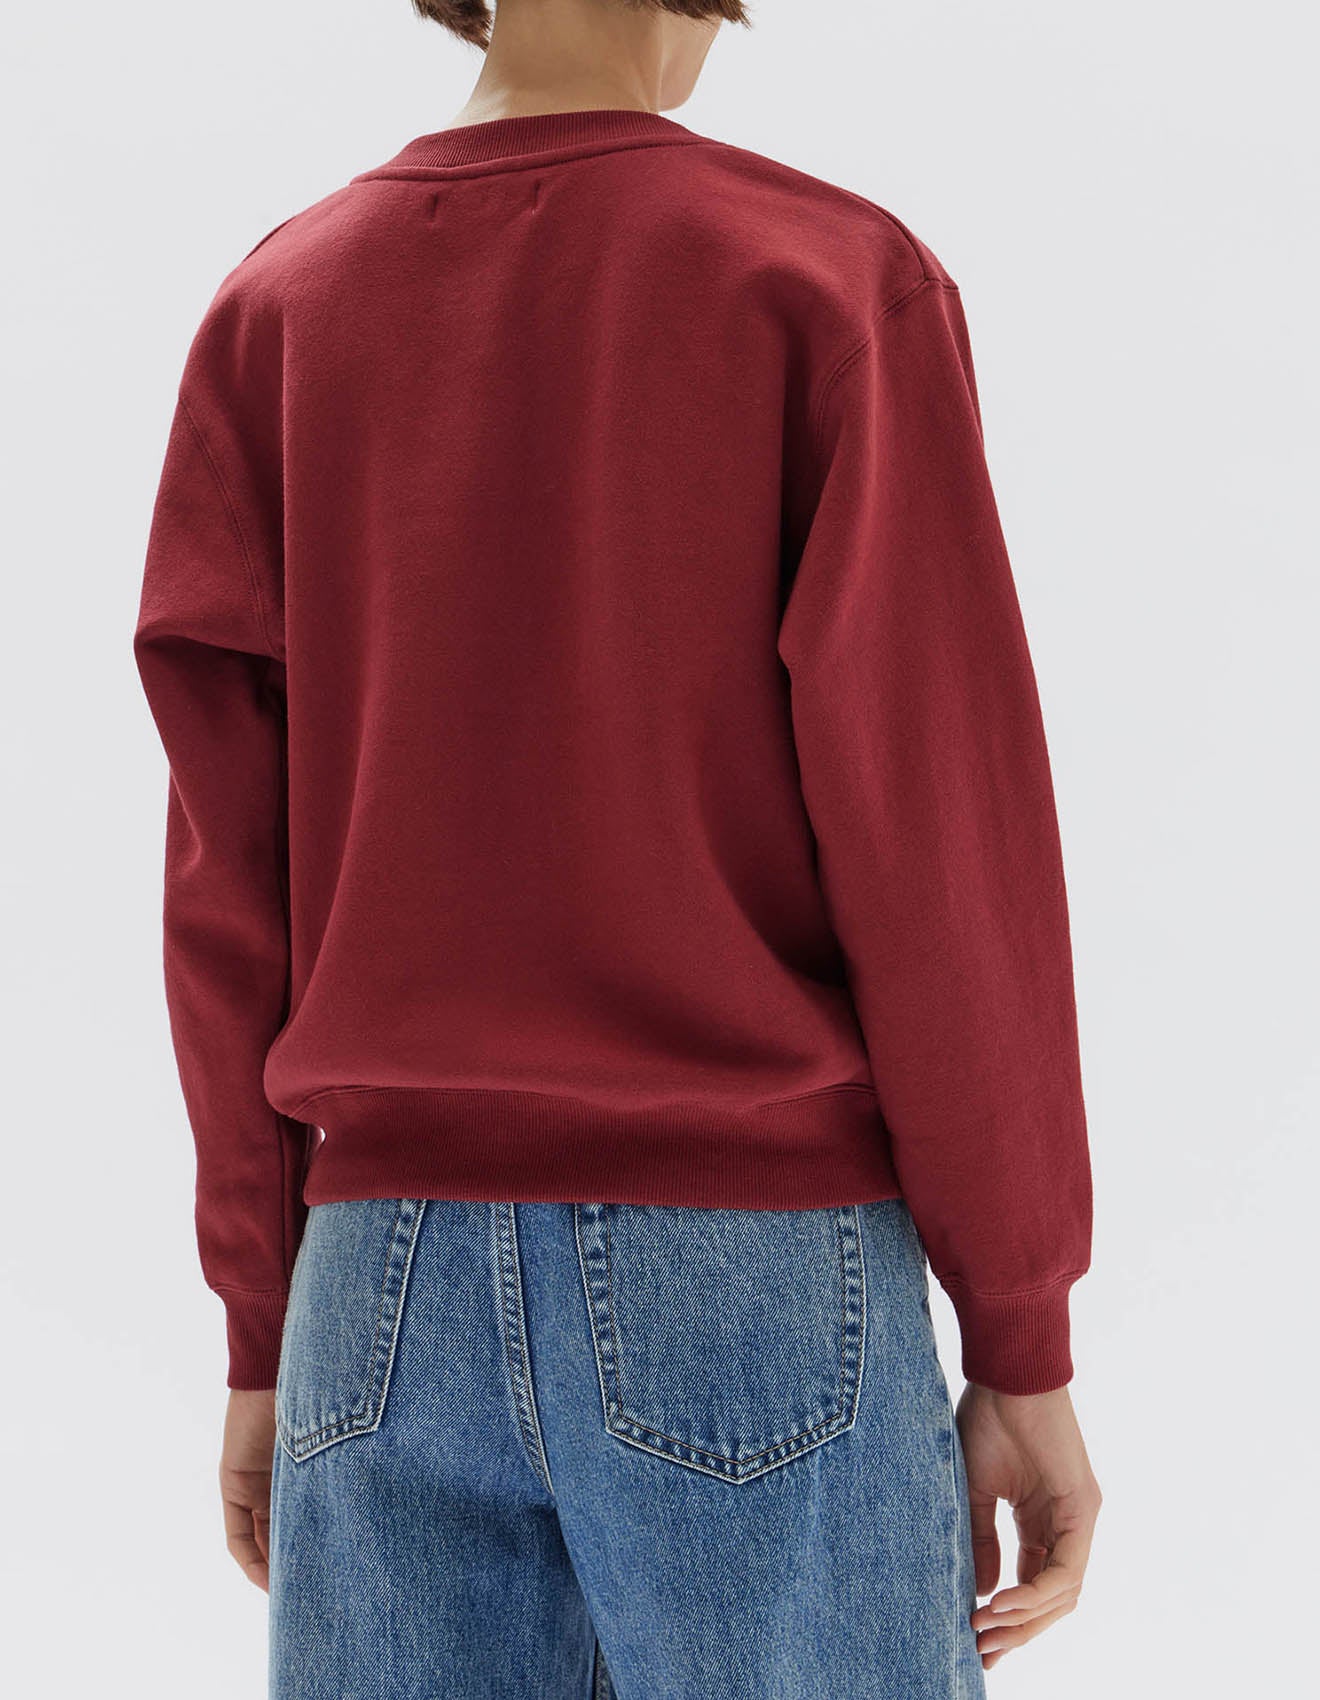 ASSEMBLY LABEL // Womens Stacked Fleece SYRAH